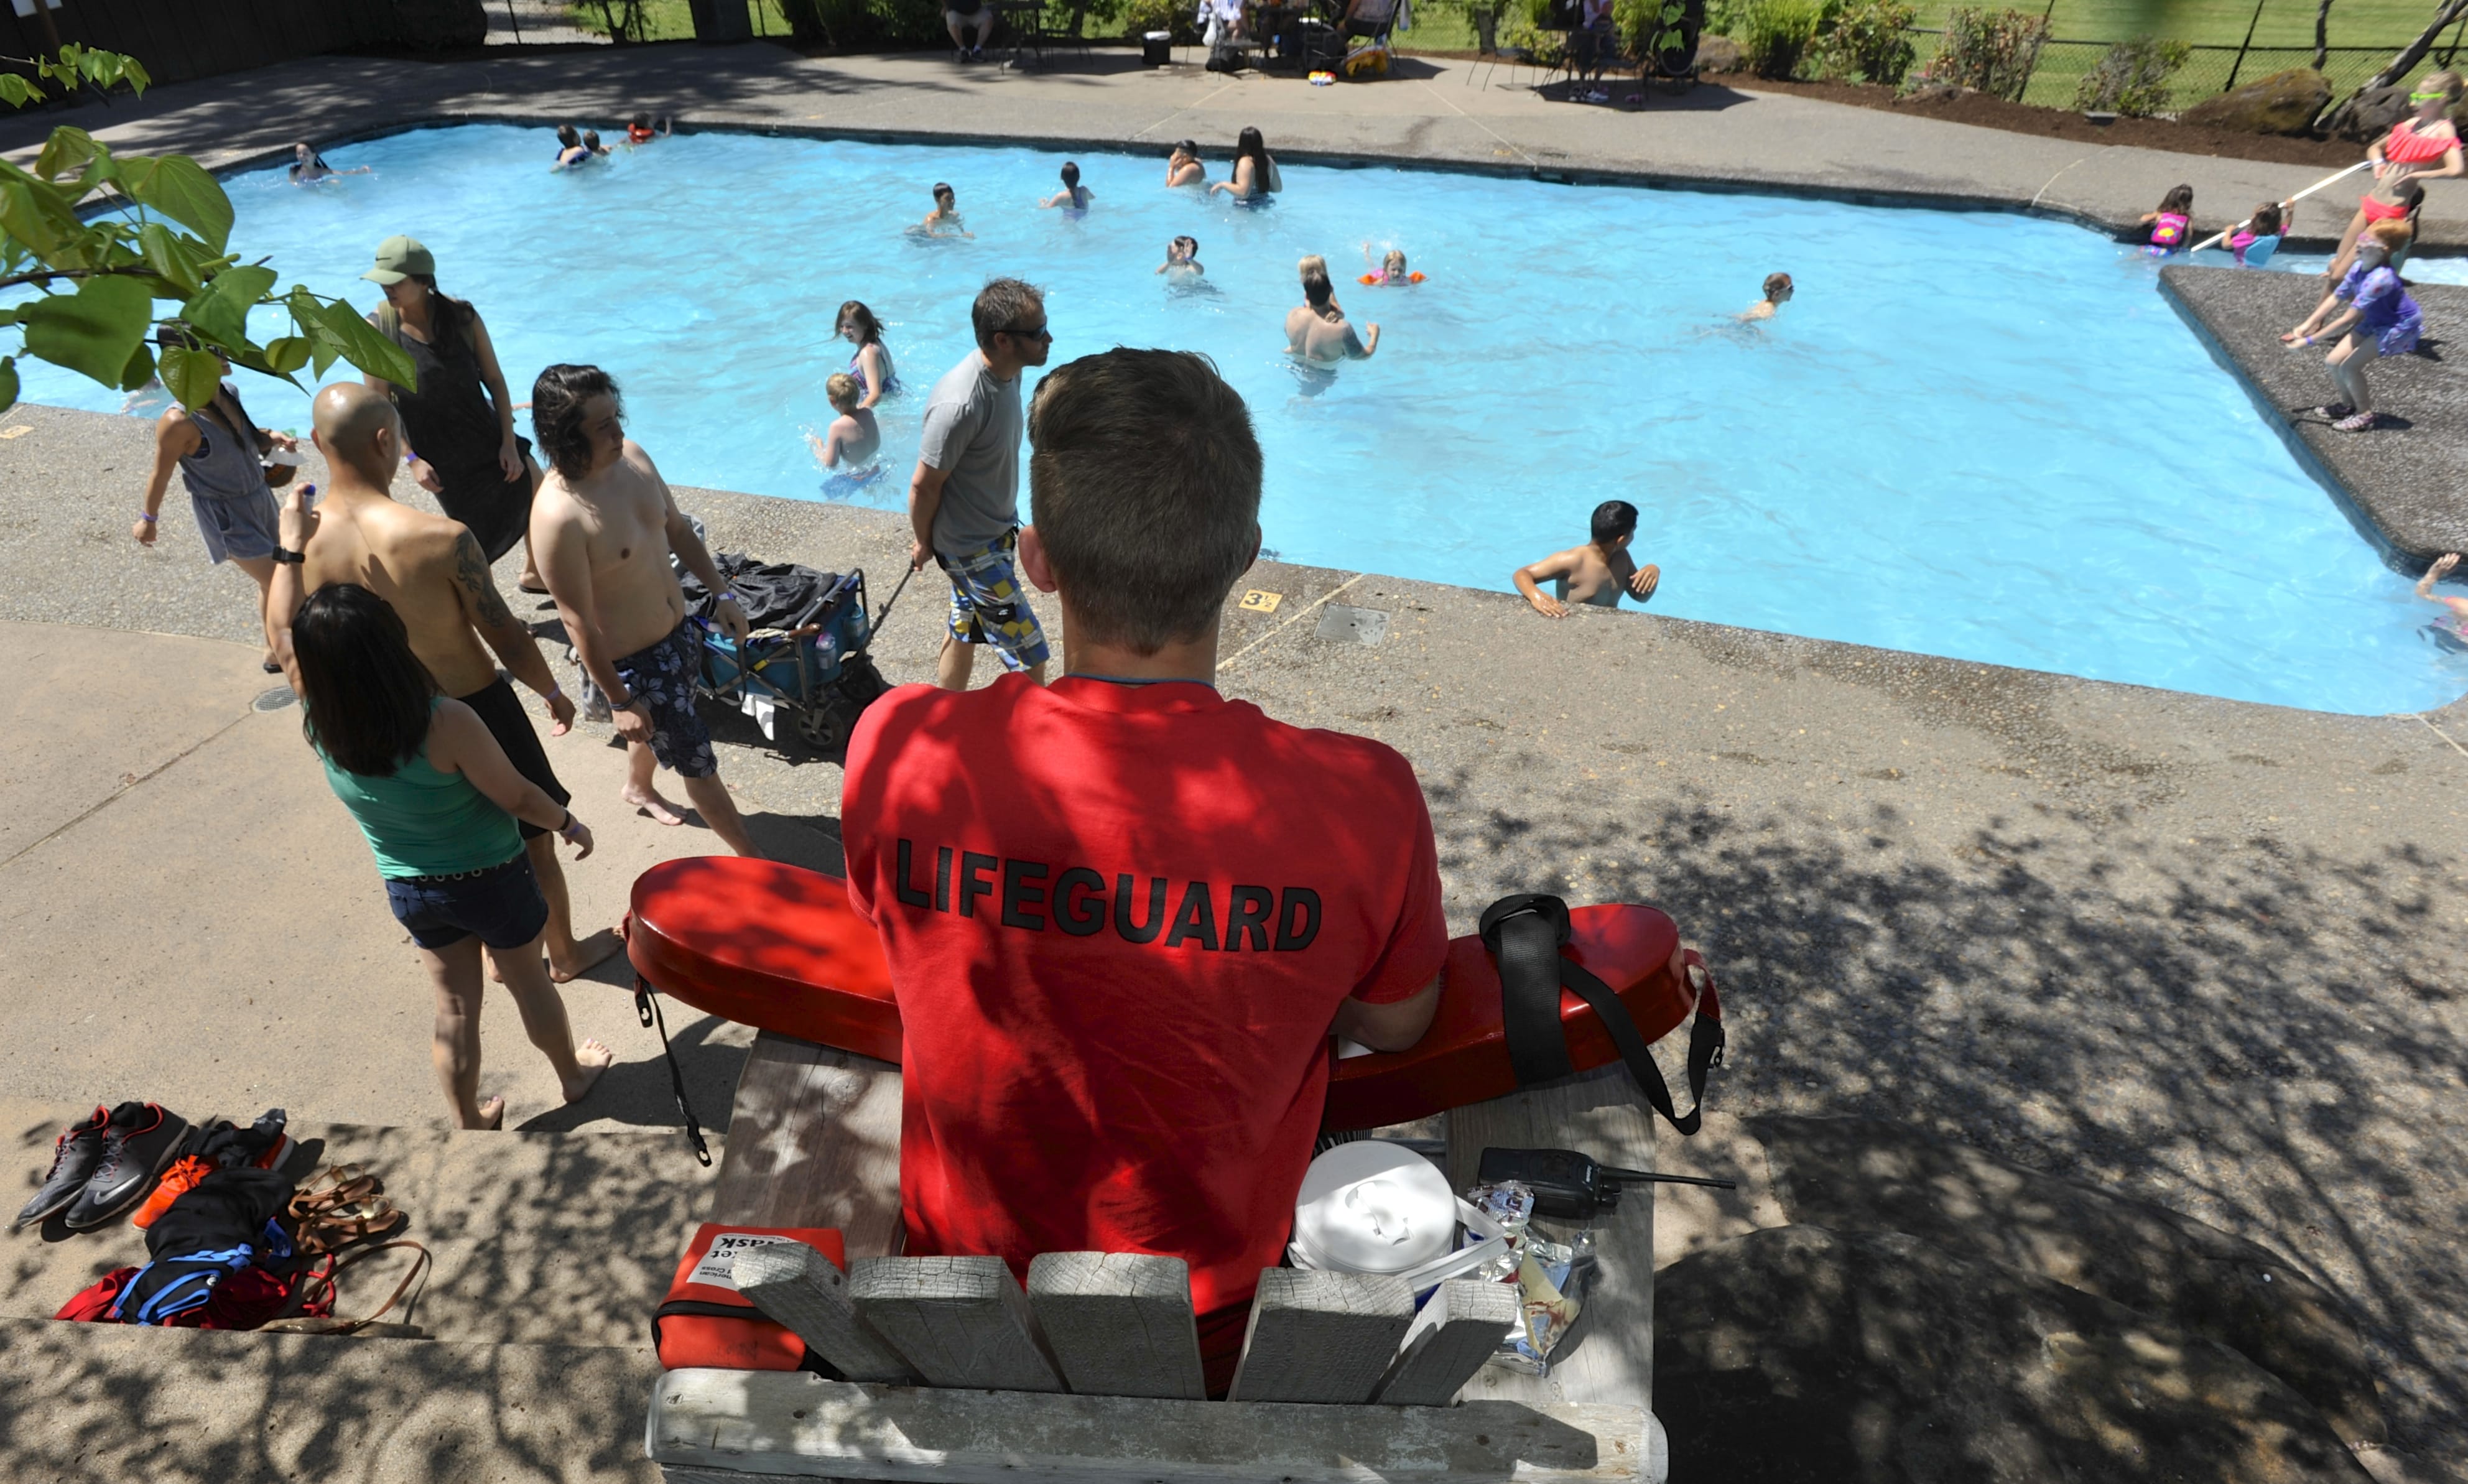 Clark County saw an increase in recreational service jobs — a category that includes lifeguards — in July.